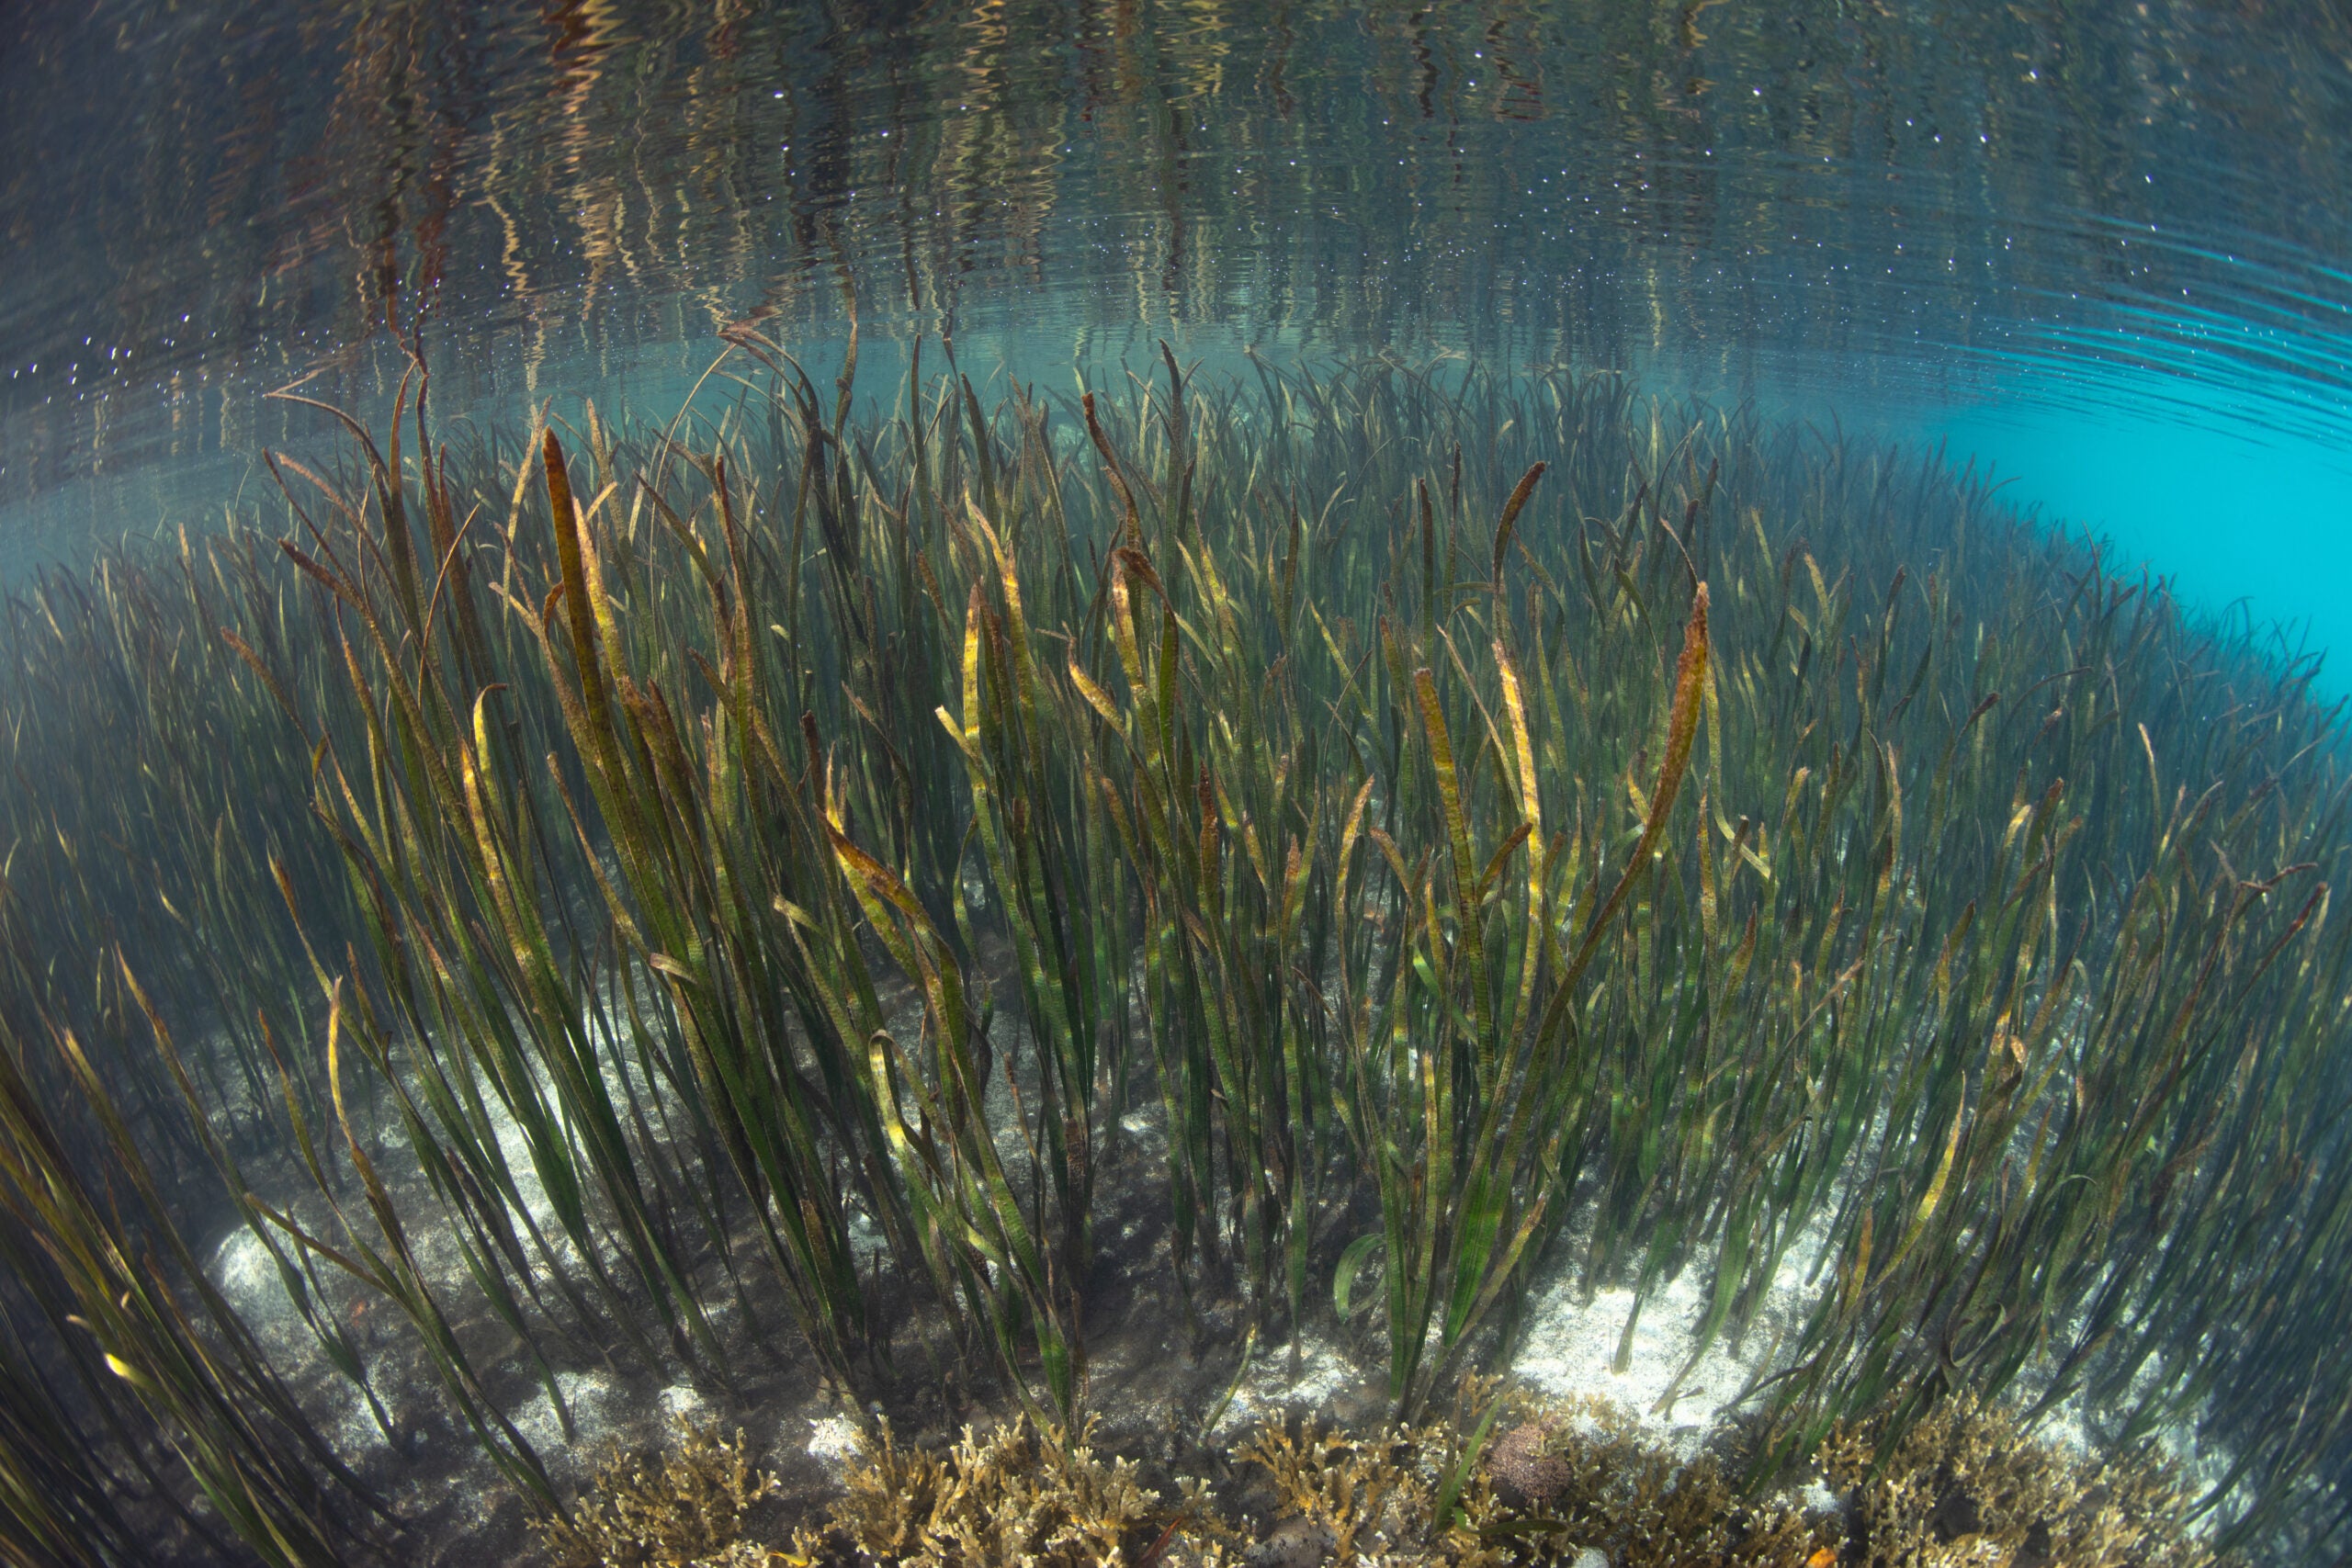 Seagrass underwater to show ocean's carbon-storage potential